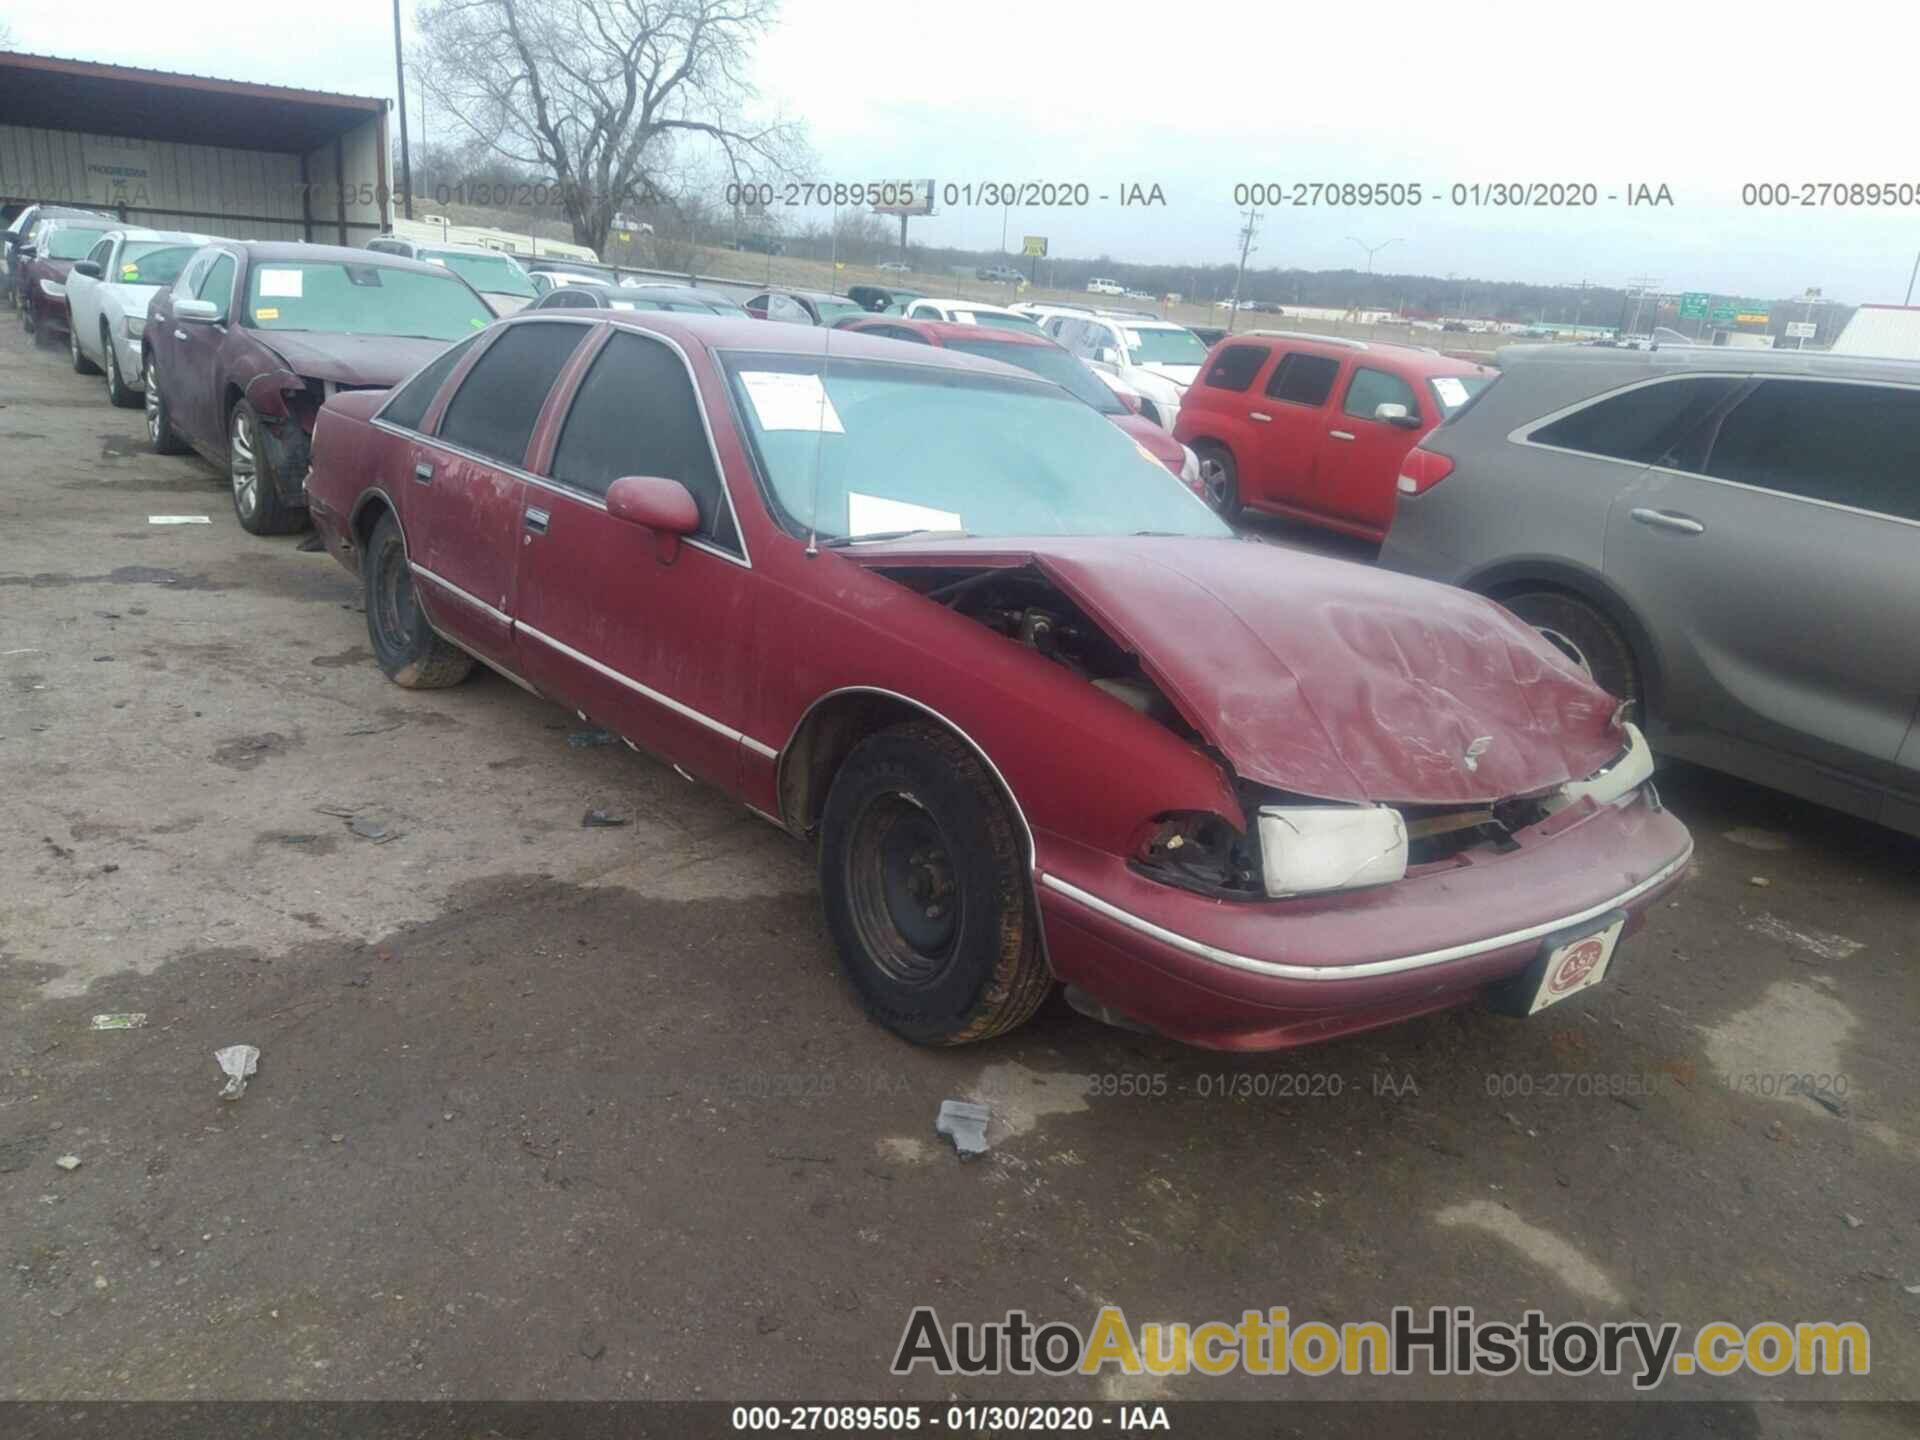 CHEVROLET CAPRICE CLASSIC, 1G1BL53EXPR130208